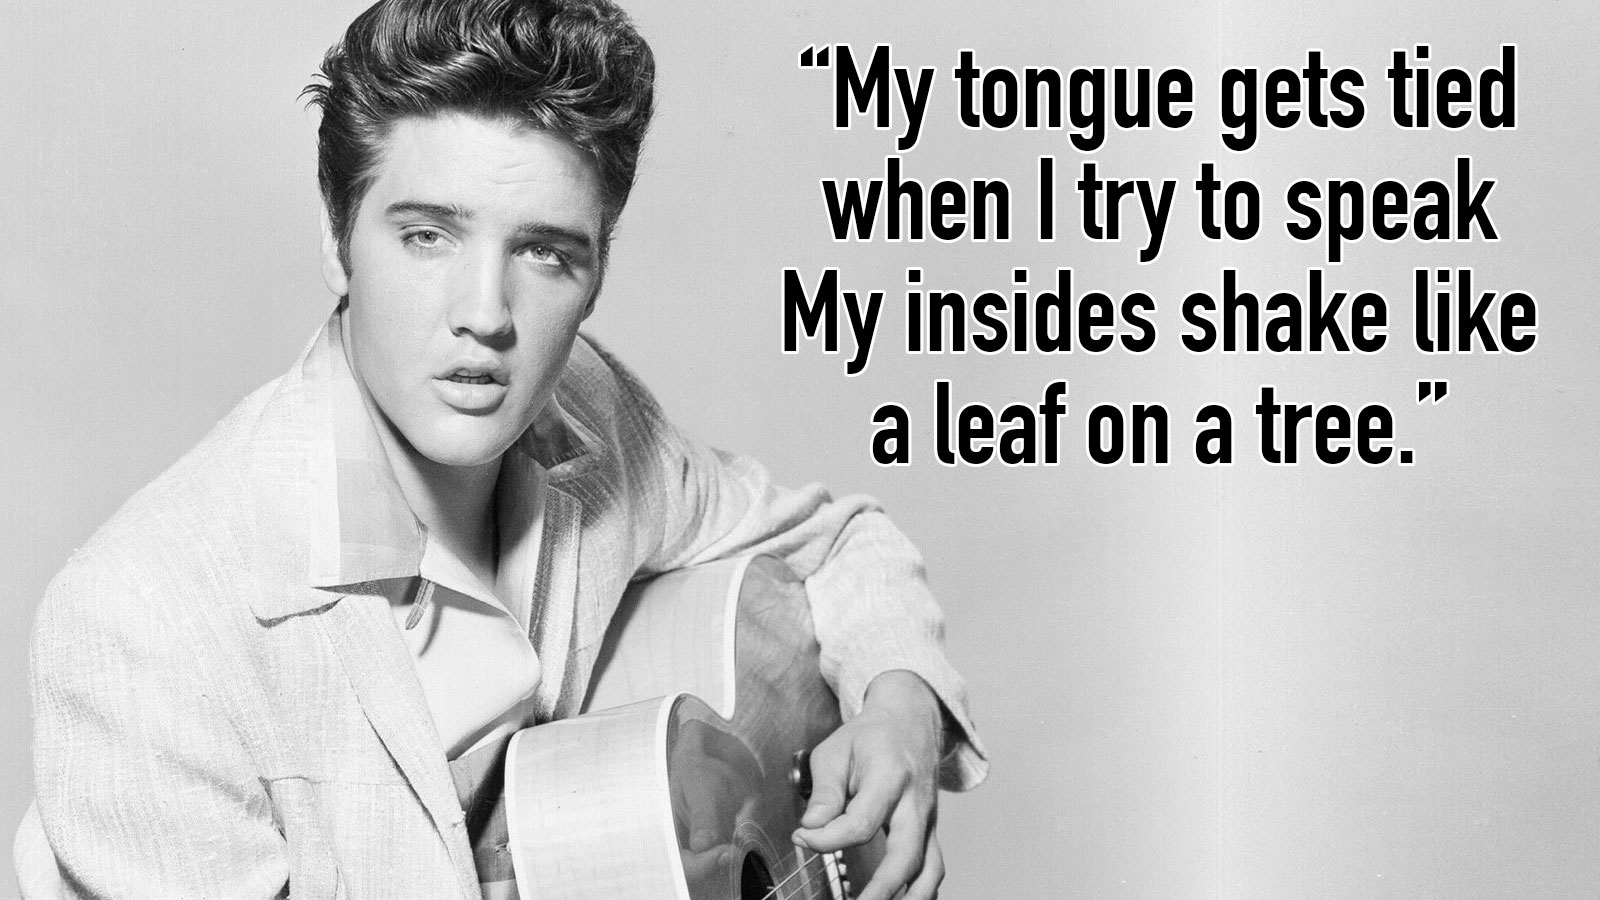 Can You Guess the Elvis Presley Song This Lyric Is From? Quiz 81